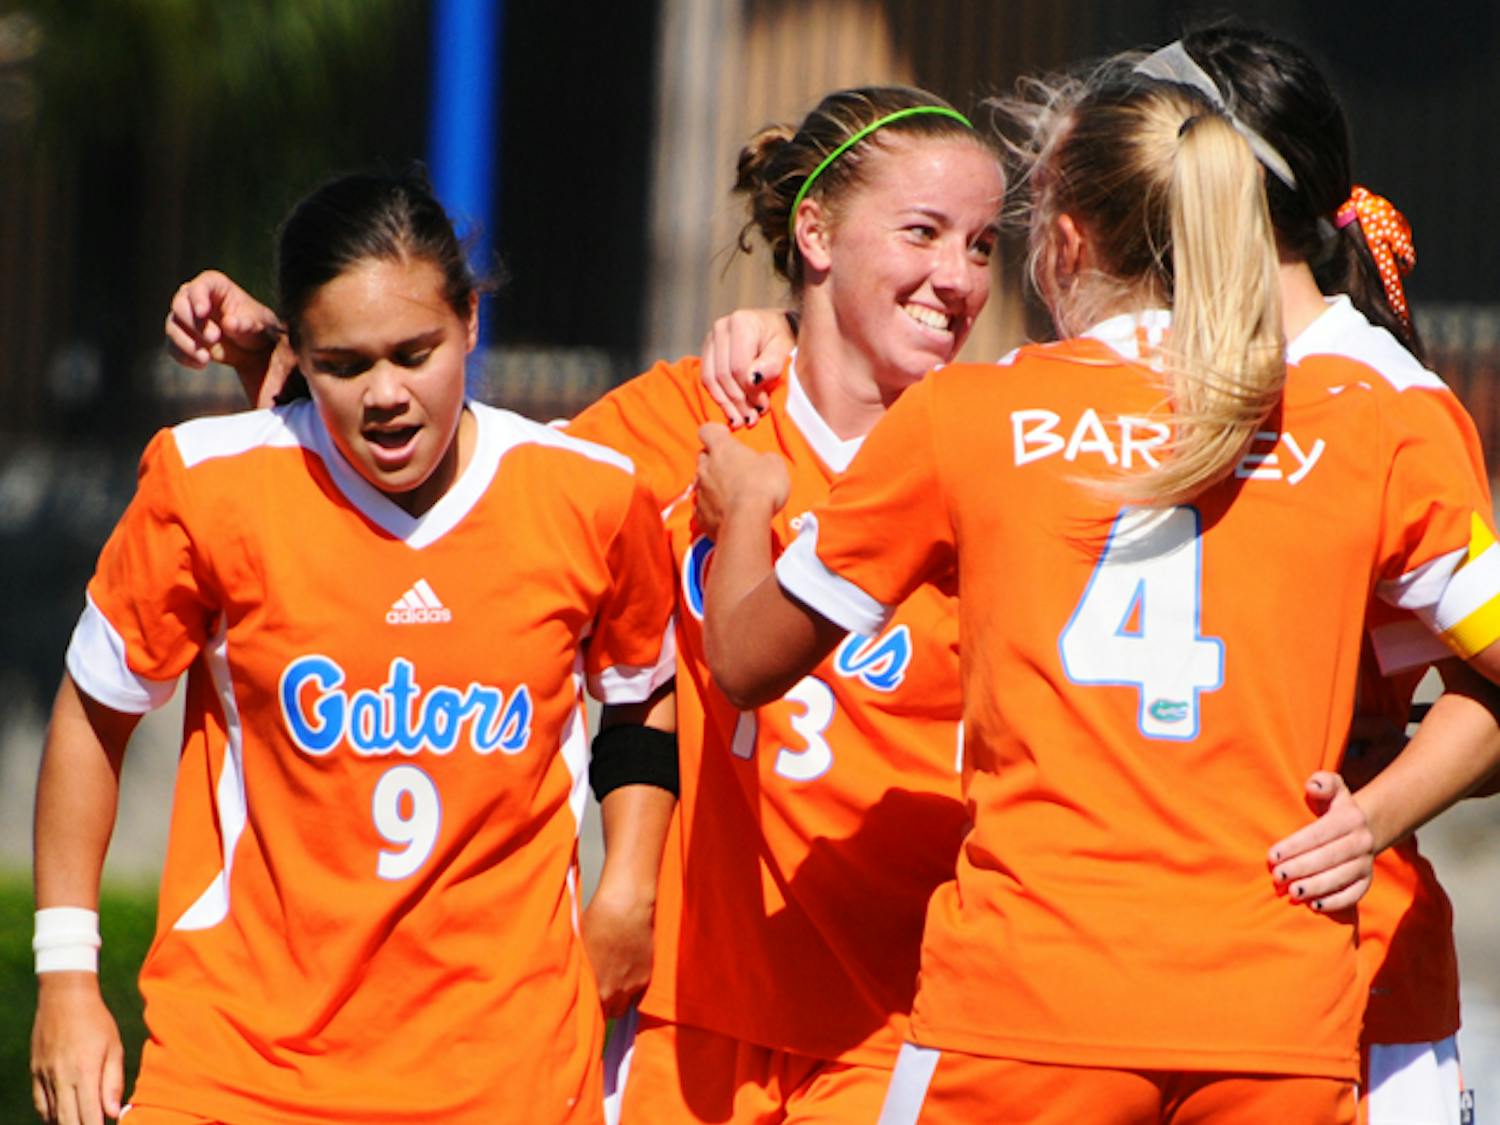 Florida sophomore forward Annie Speese (center) tied the Gators' game against New Mexico on Sept. 9 with a right-footed kick in the 50th minute. Speese tore her right ACL during Florida's loss in the second round of the NCAA Tournament last season.